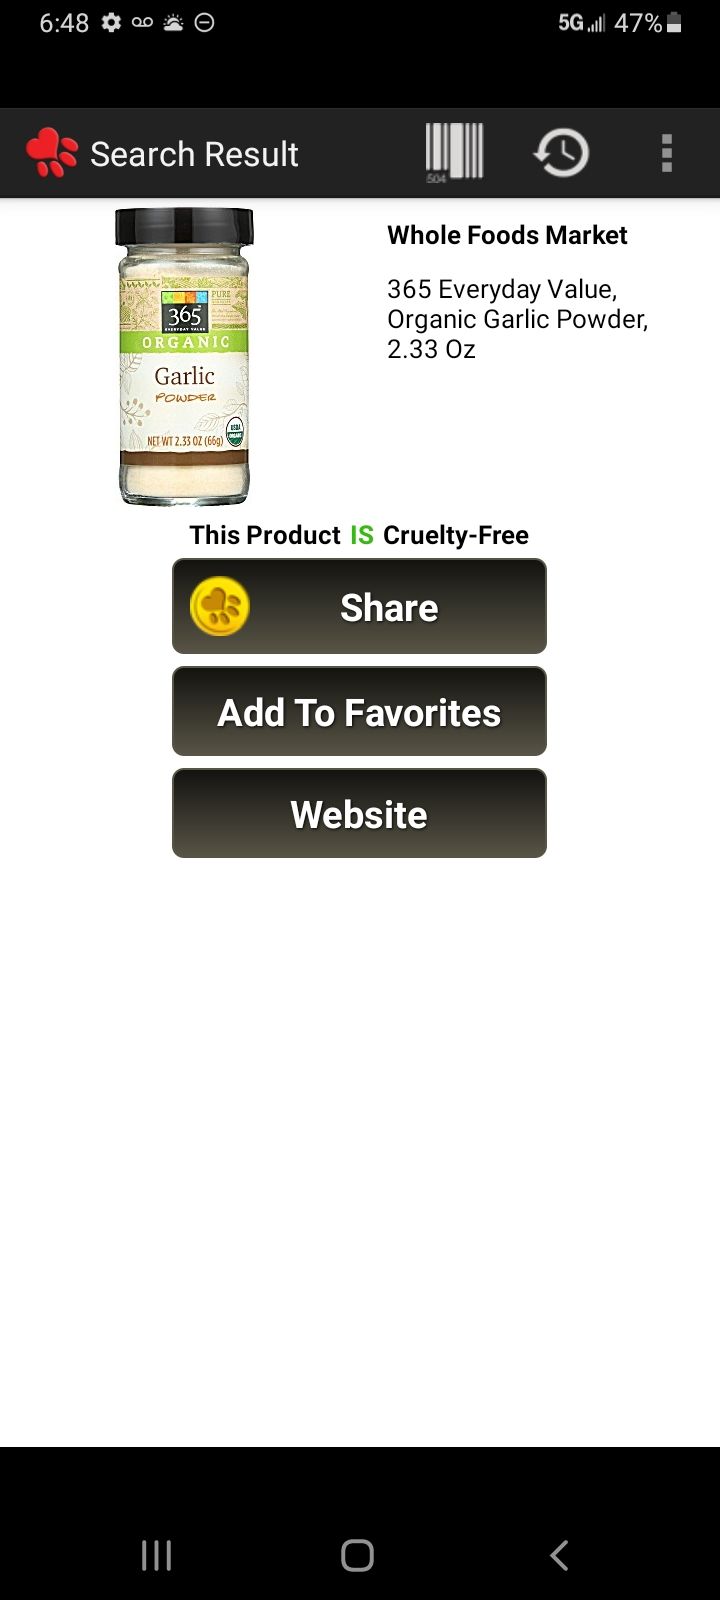 Using this vegan scan app to assess the purity of some garlic powder.